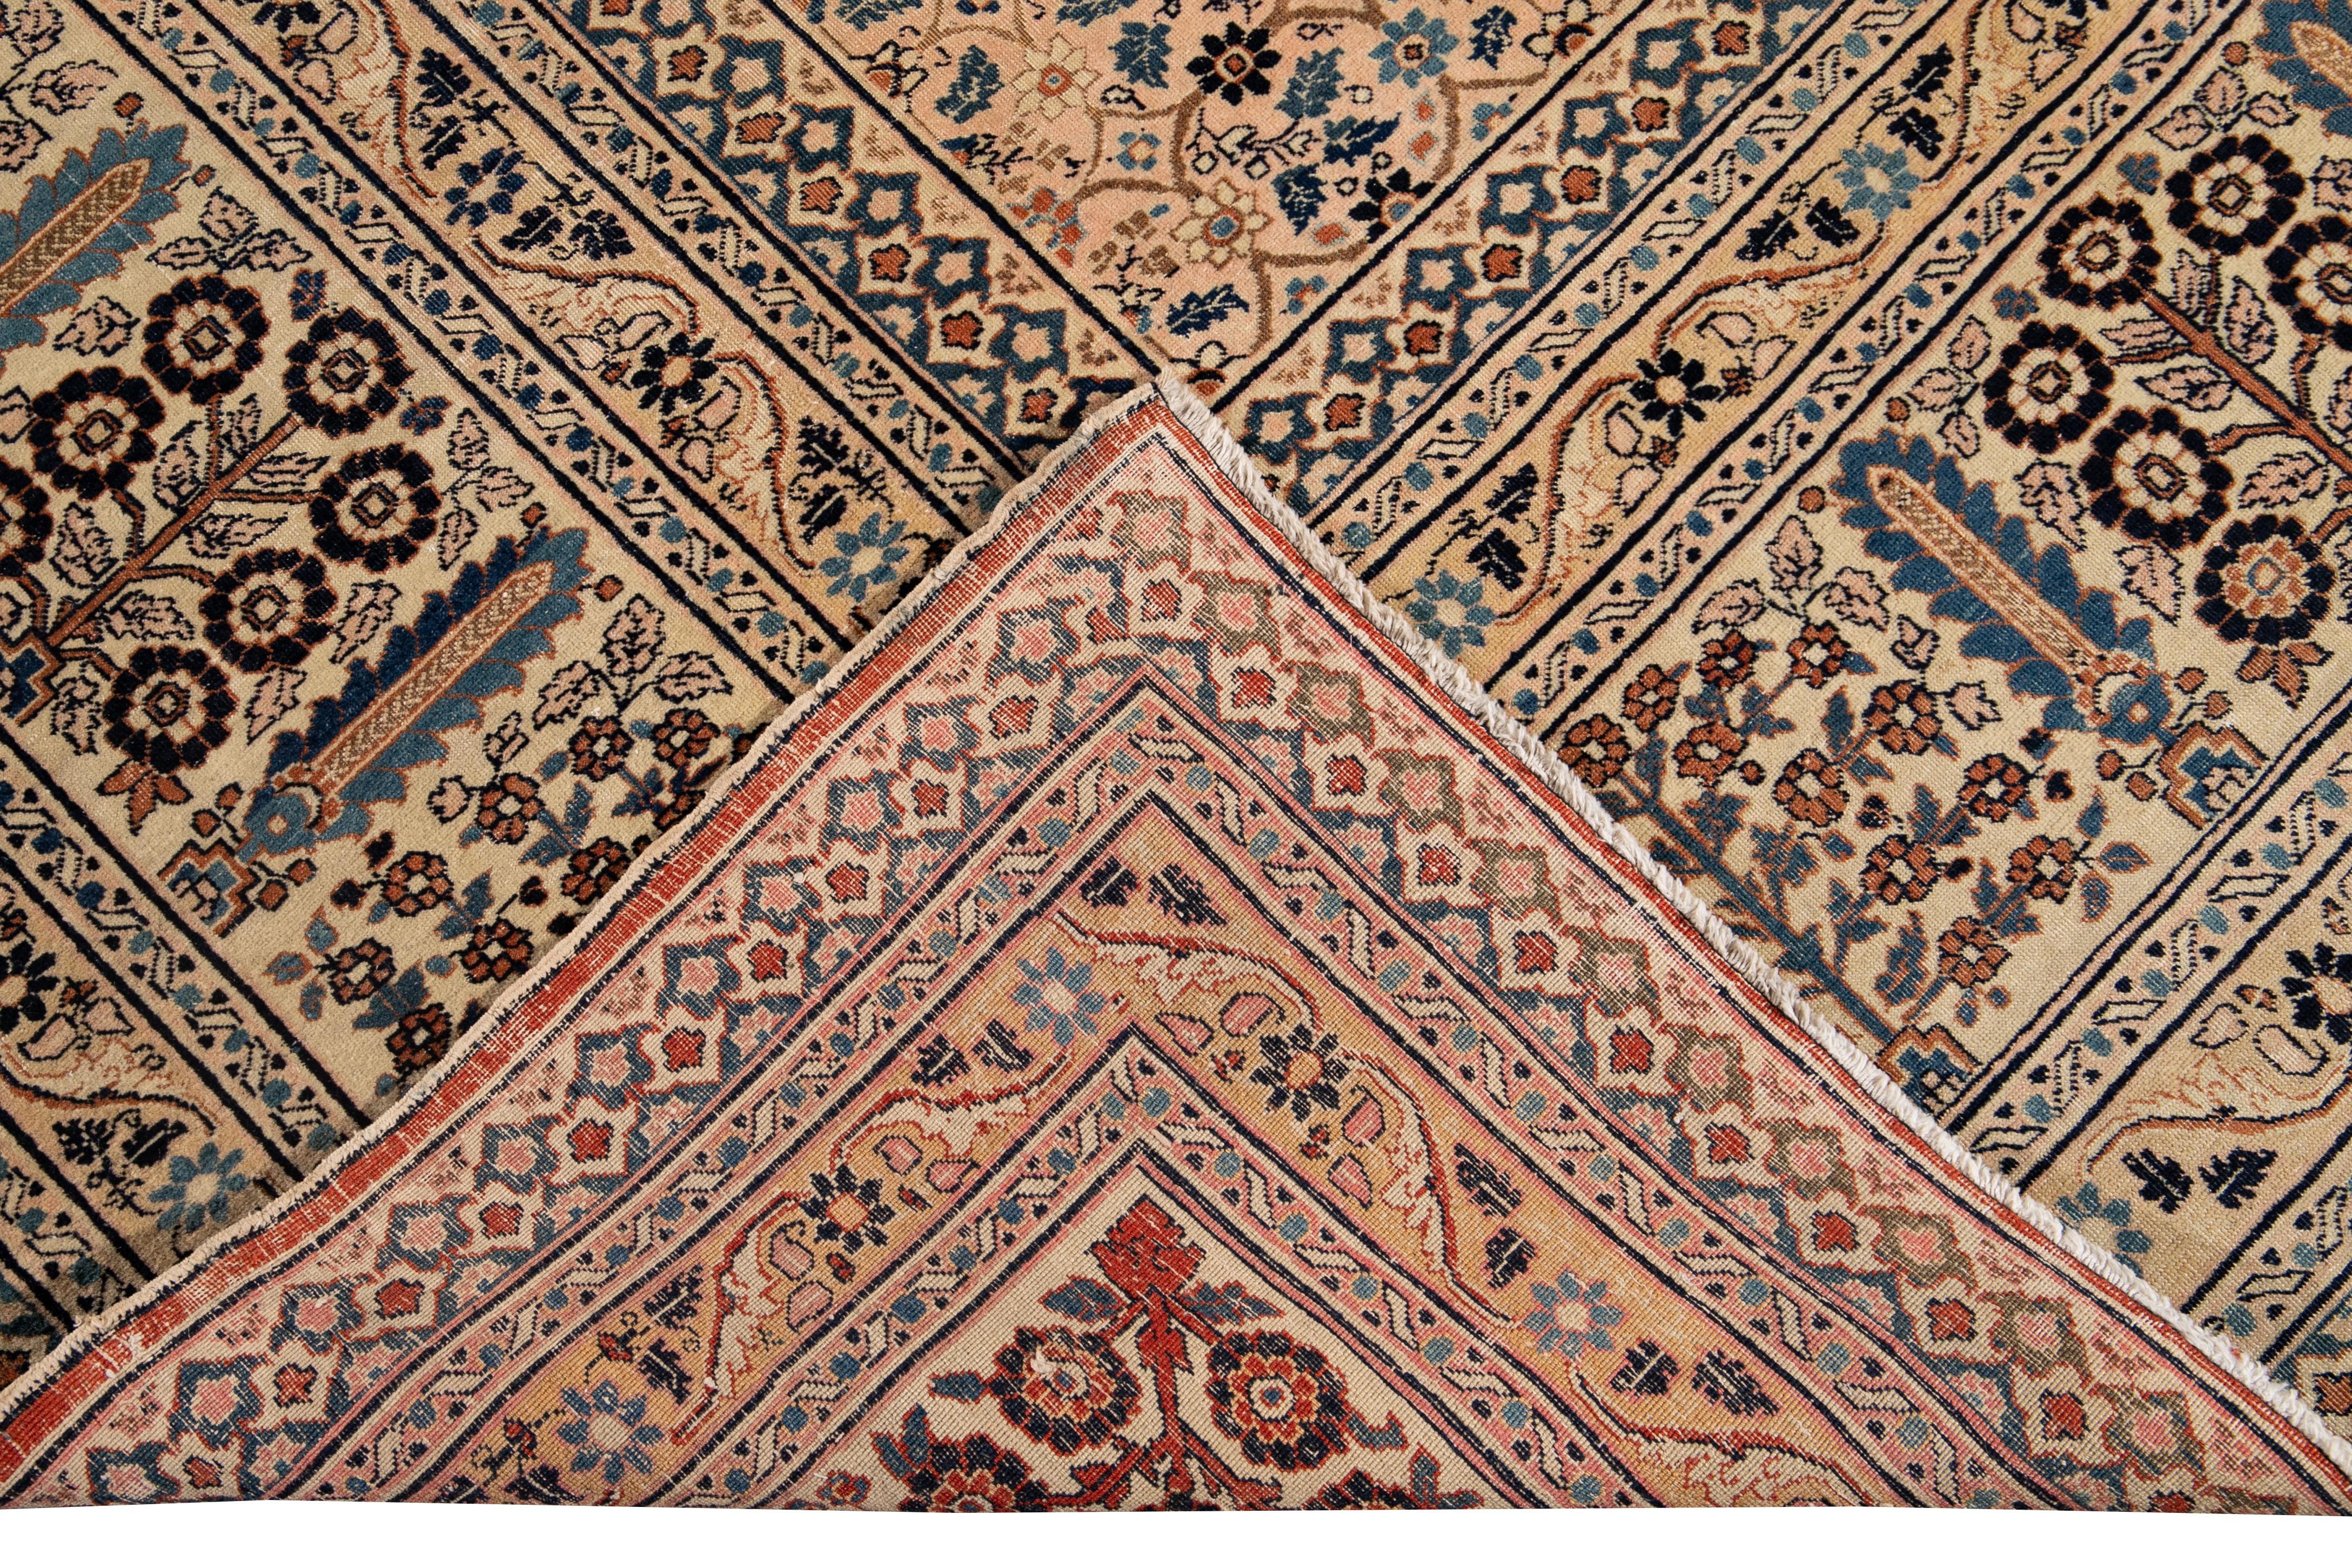 Beautiful antique Persian Tabriz hand knotted wool rug with a peach field. This Tabriz has accents of blue, rose, and brown in a gorgeous all-over geometric floral shabby chic design.

This rug measures: 9'9